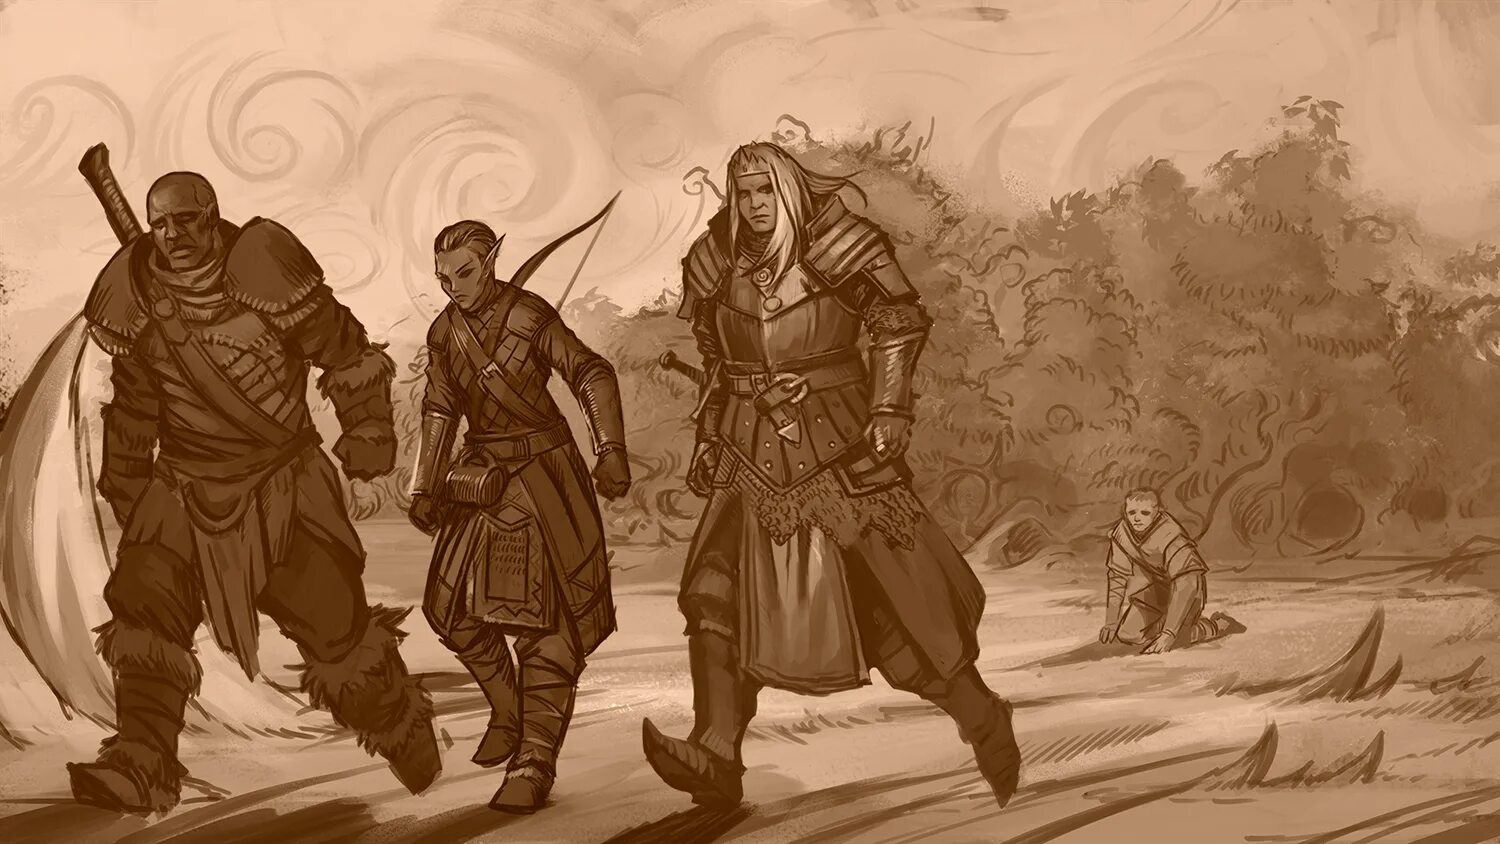 Pathfinder: Wrath of the Righteous. Pathfinder Дейран. Патфайндер Wrath of the Righteous. Pathfinder Kamelia.